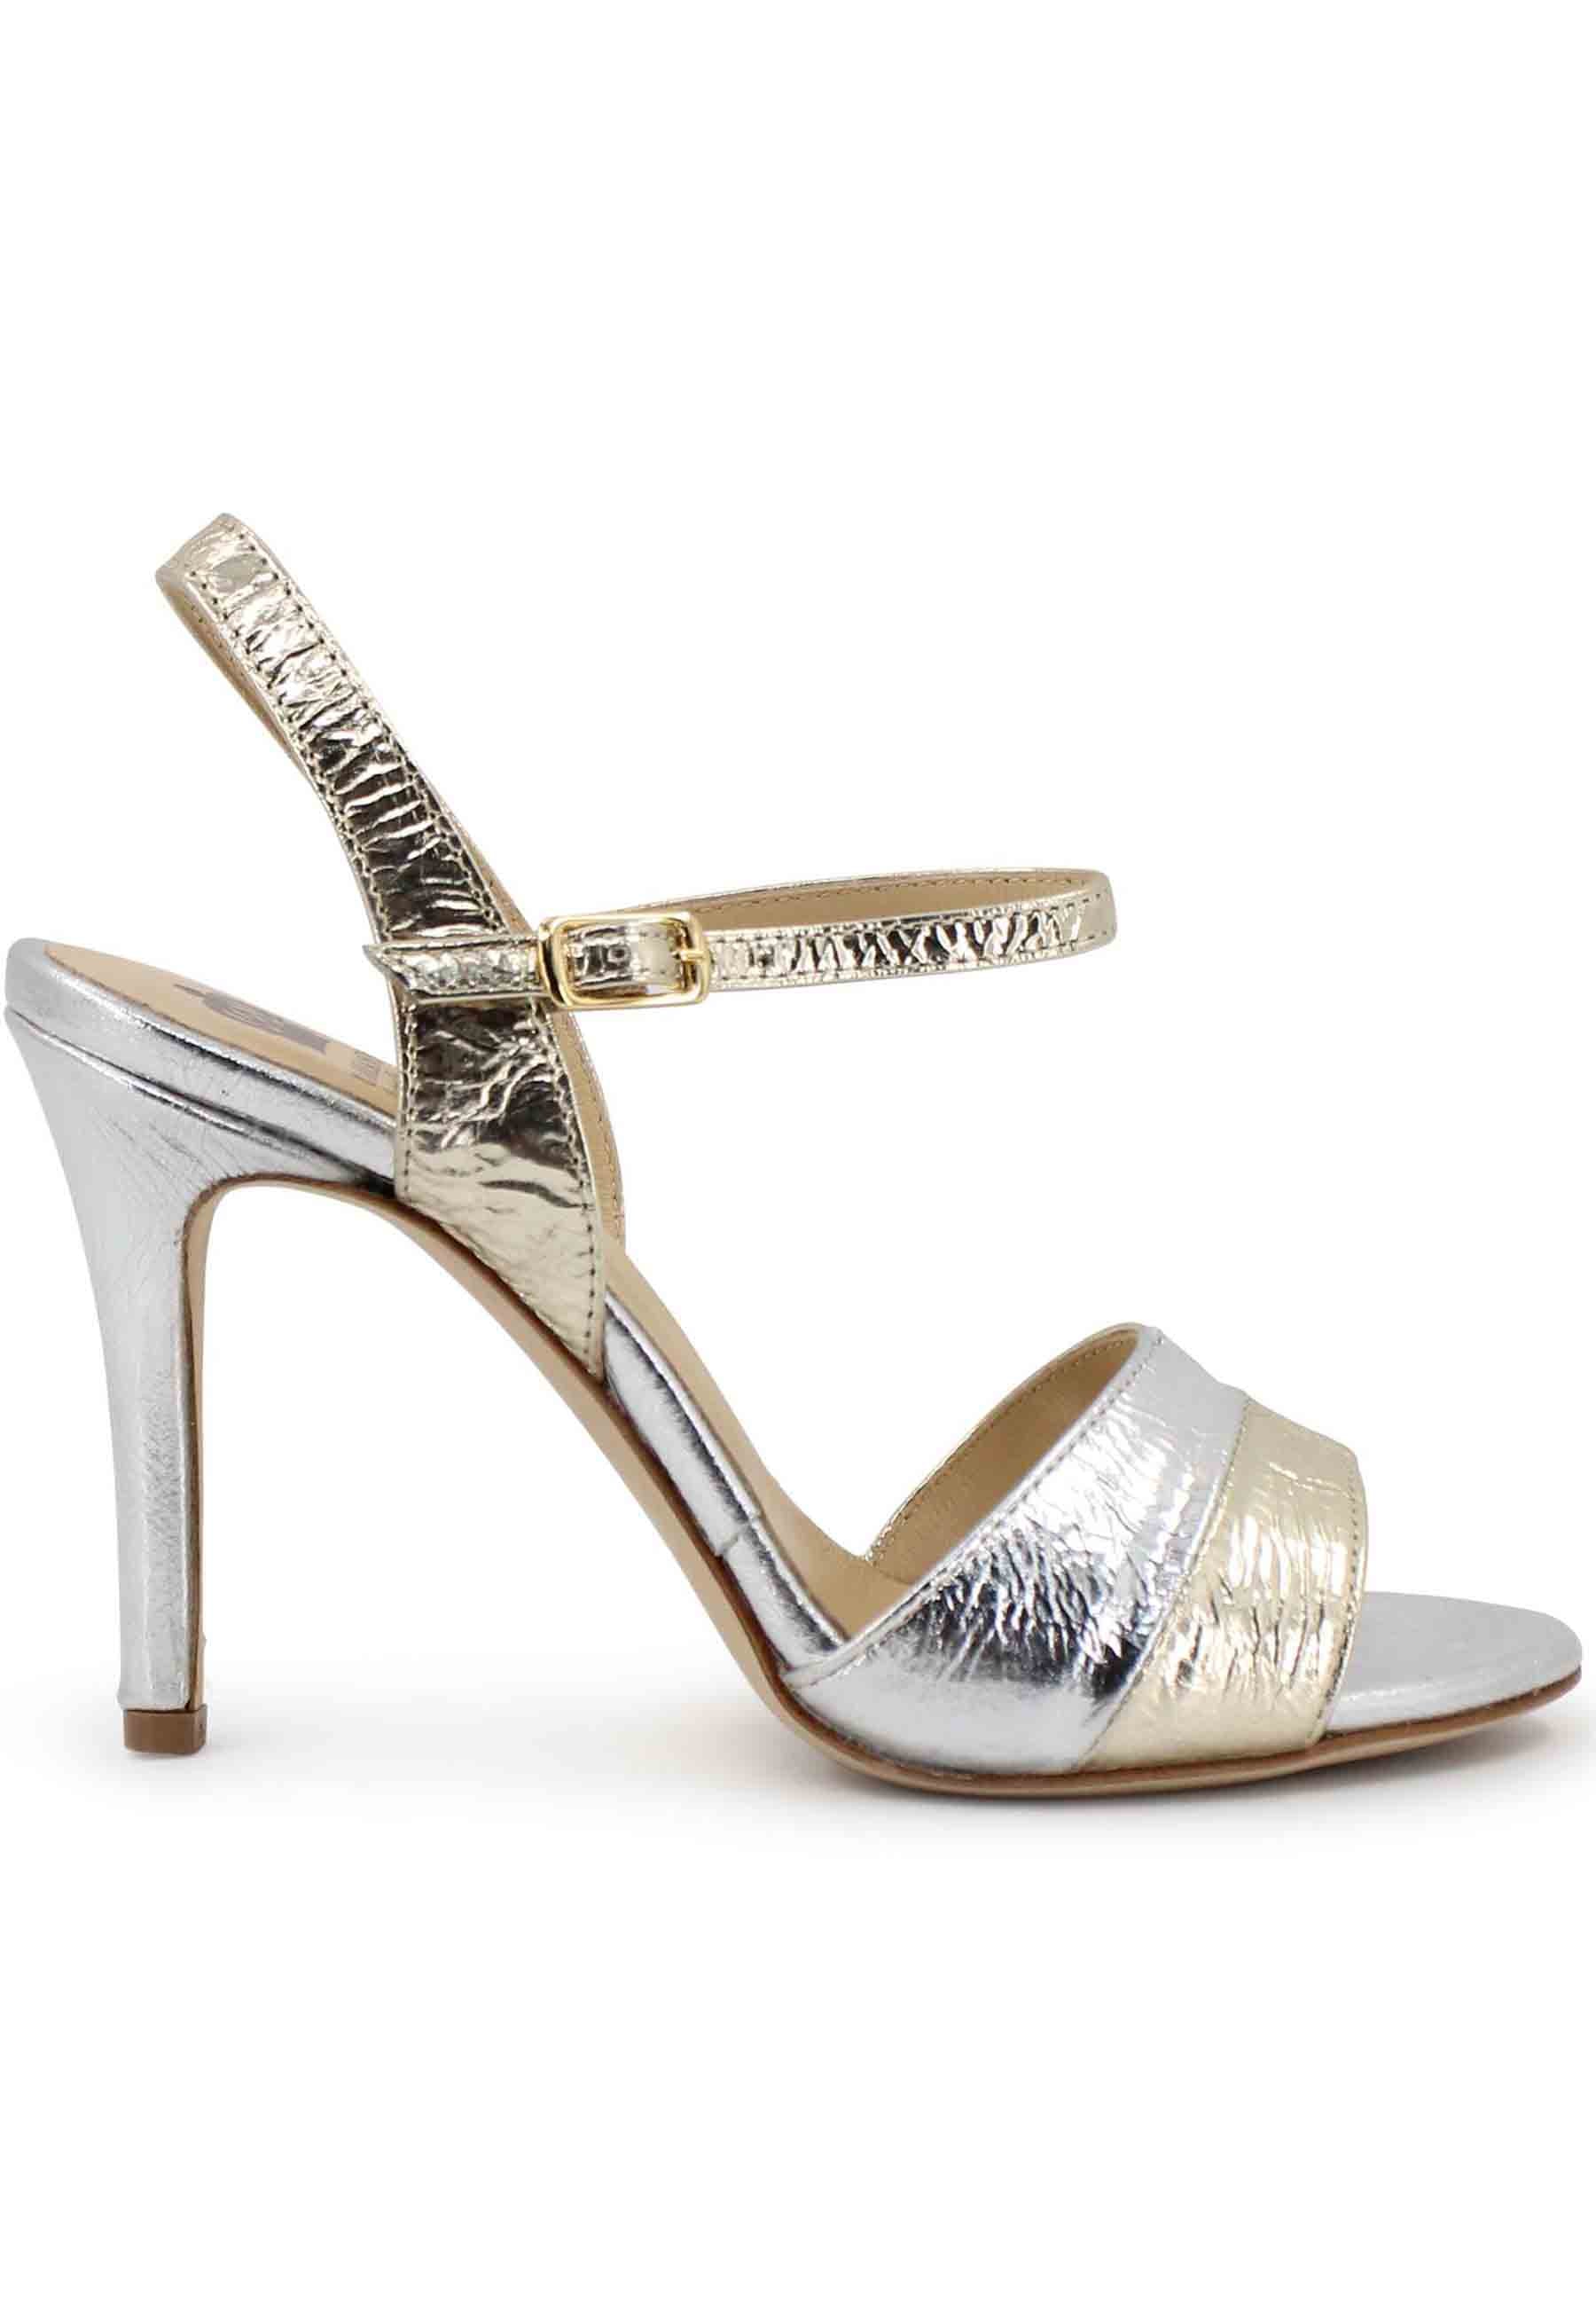 Women's sandals in gold laminated leather with high heel and ankle strap